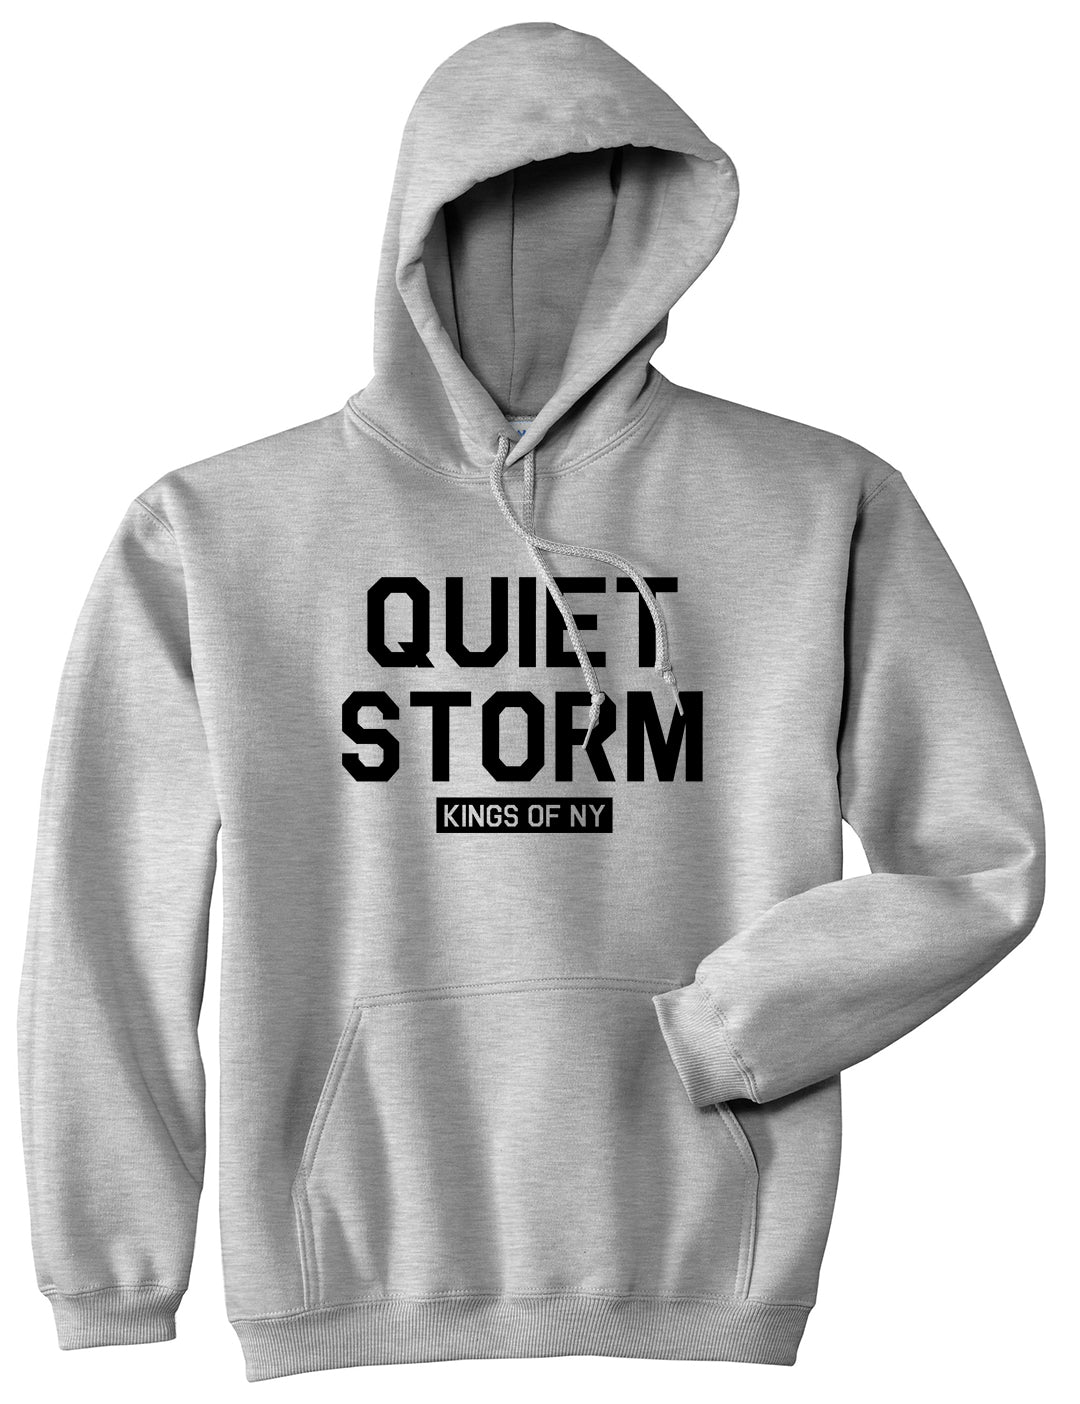 Quiet Storm Kings Of NY Mens Pullover Hoodie Grey